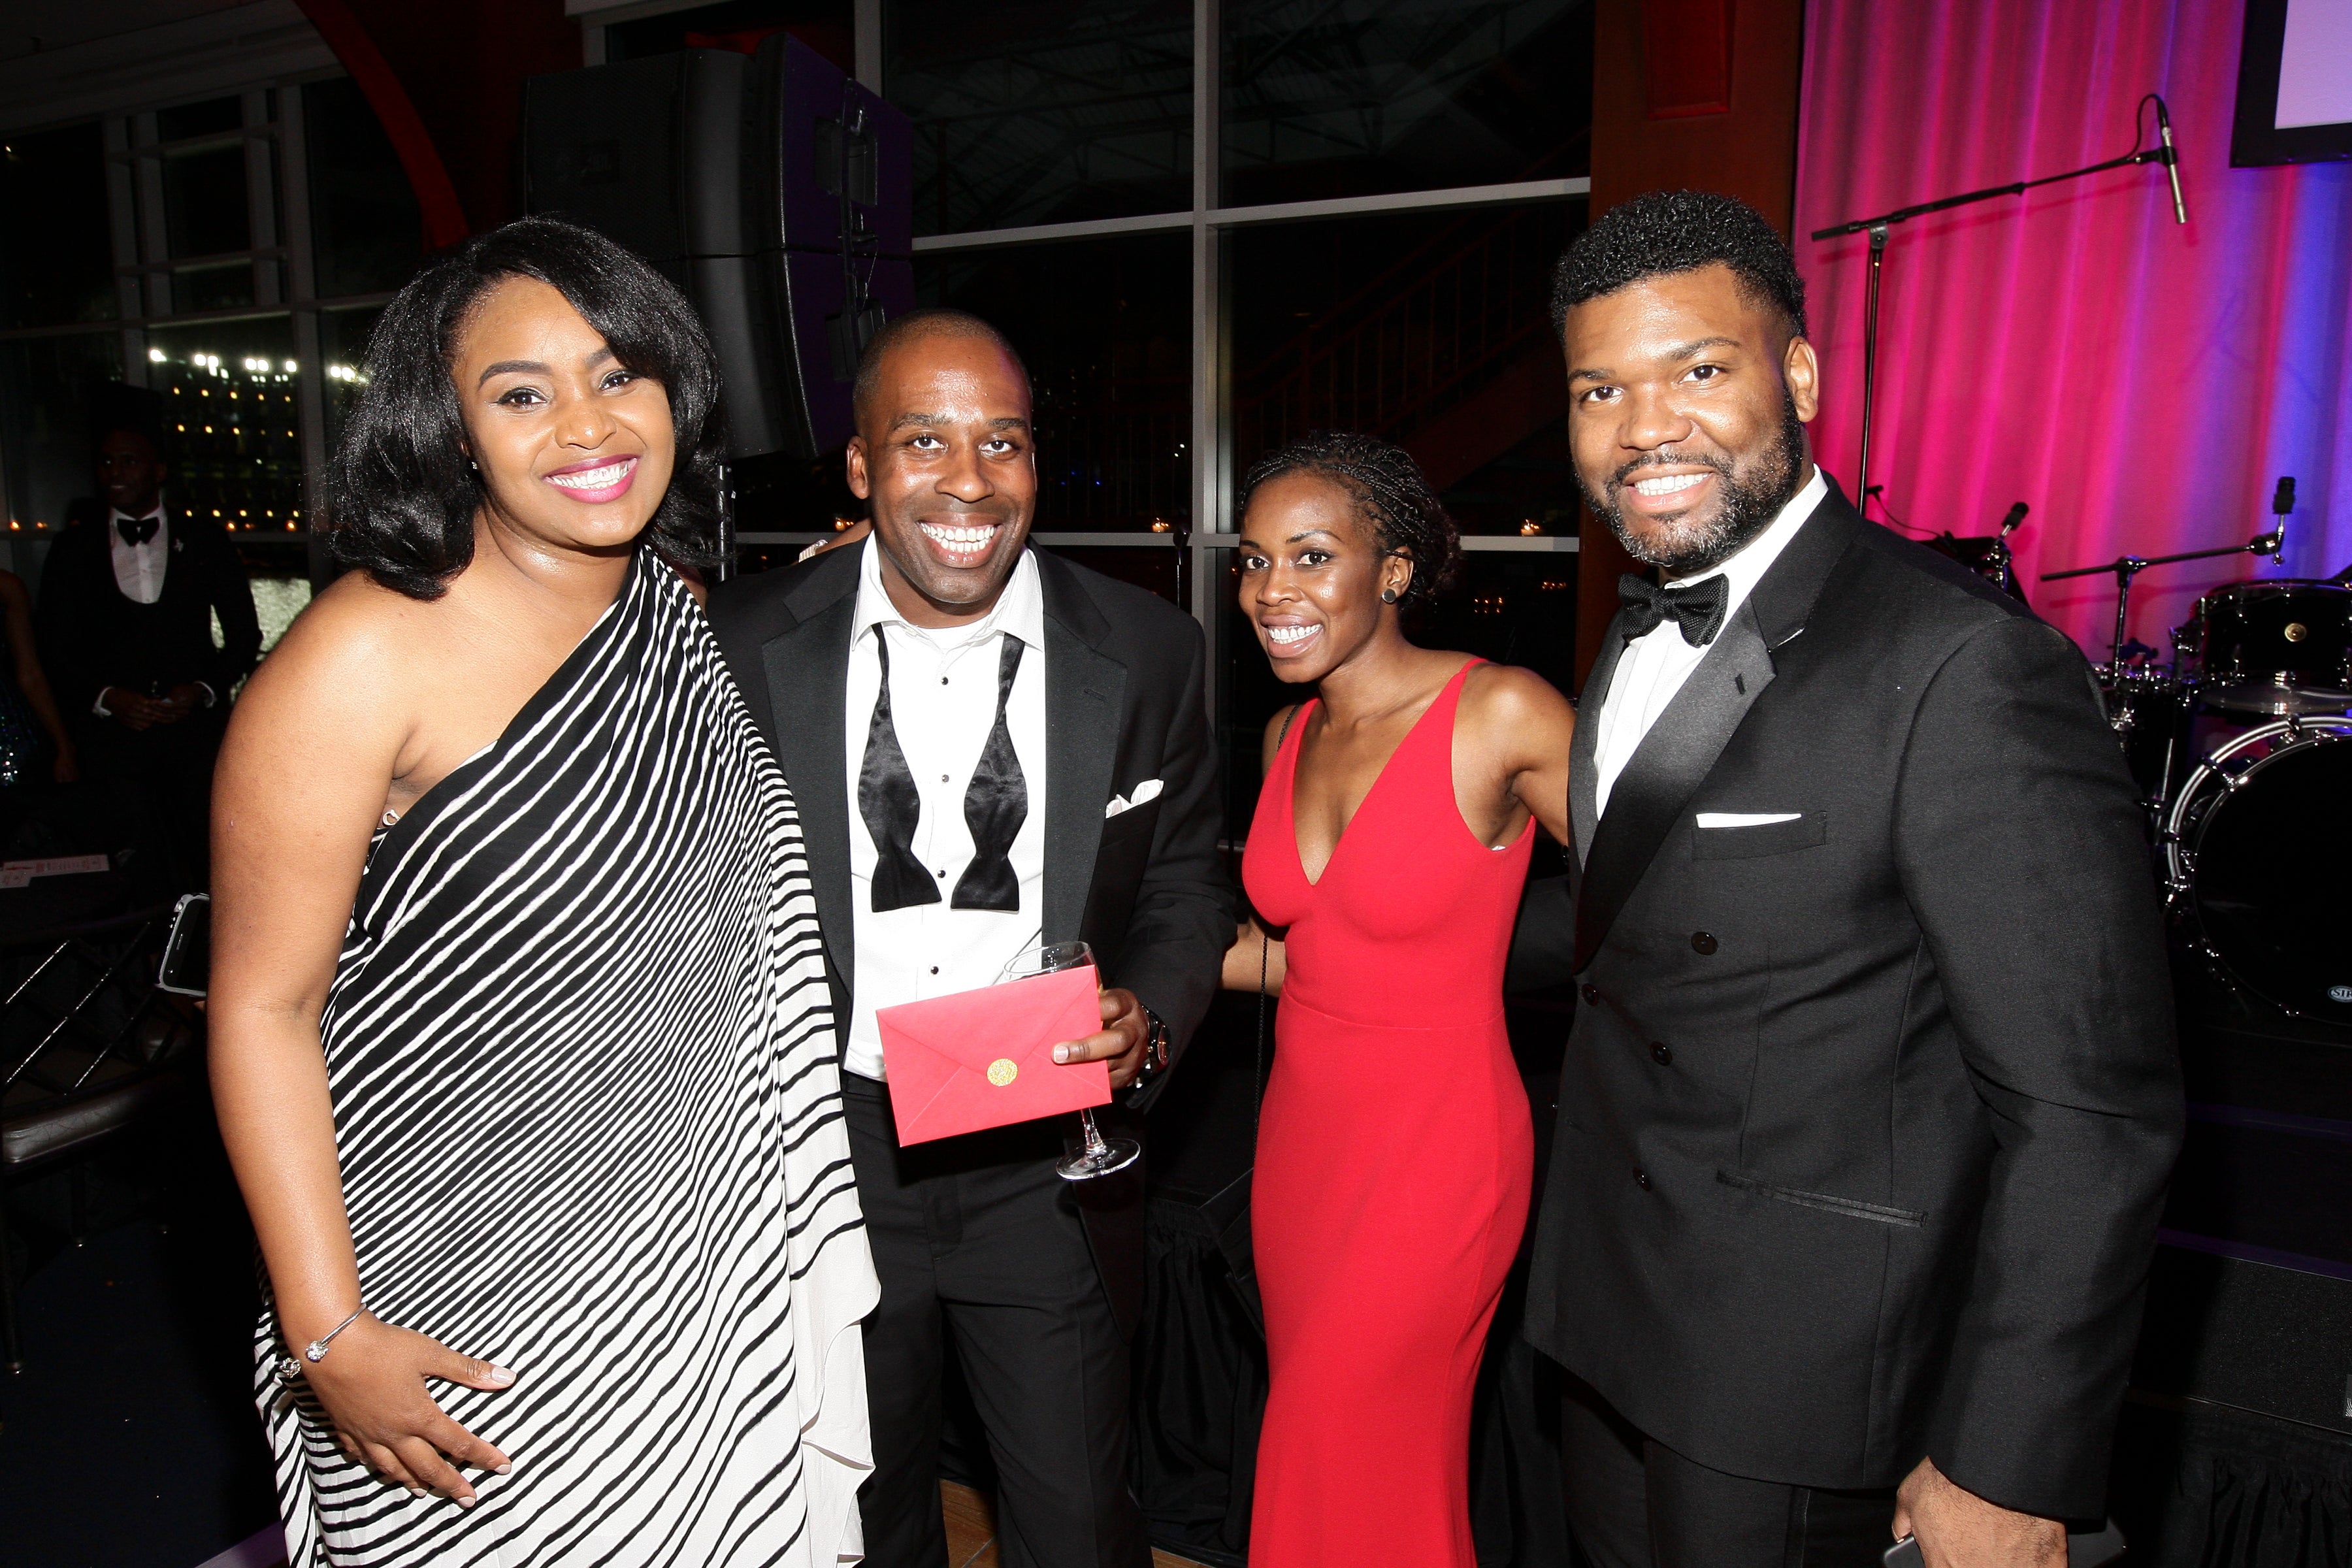 These Couples Came Out To Celebrate and Spread Love at ESSENCE's Black ...